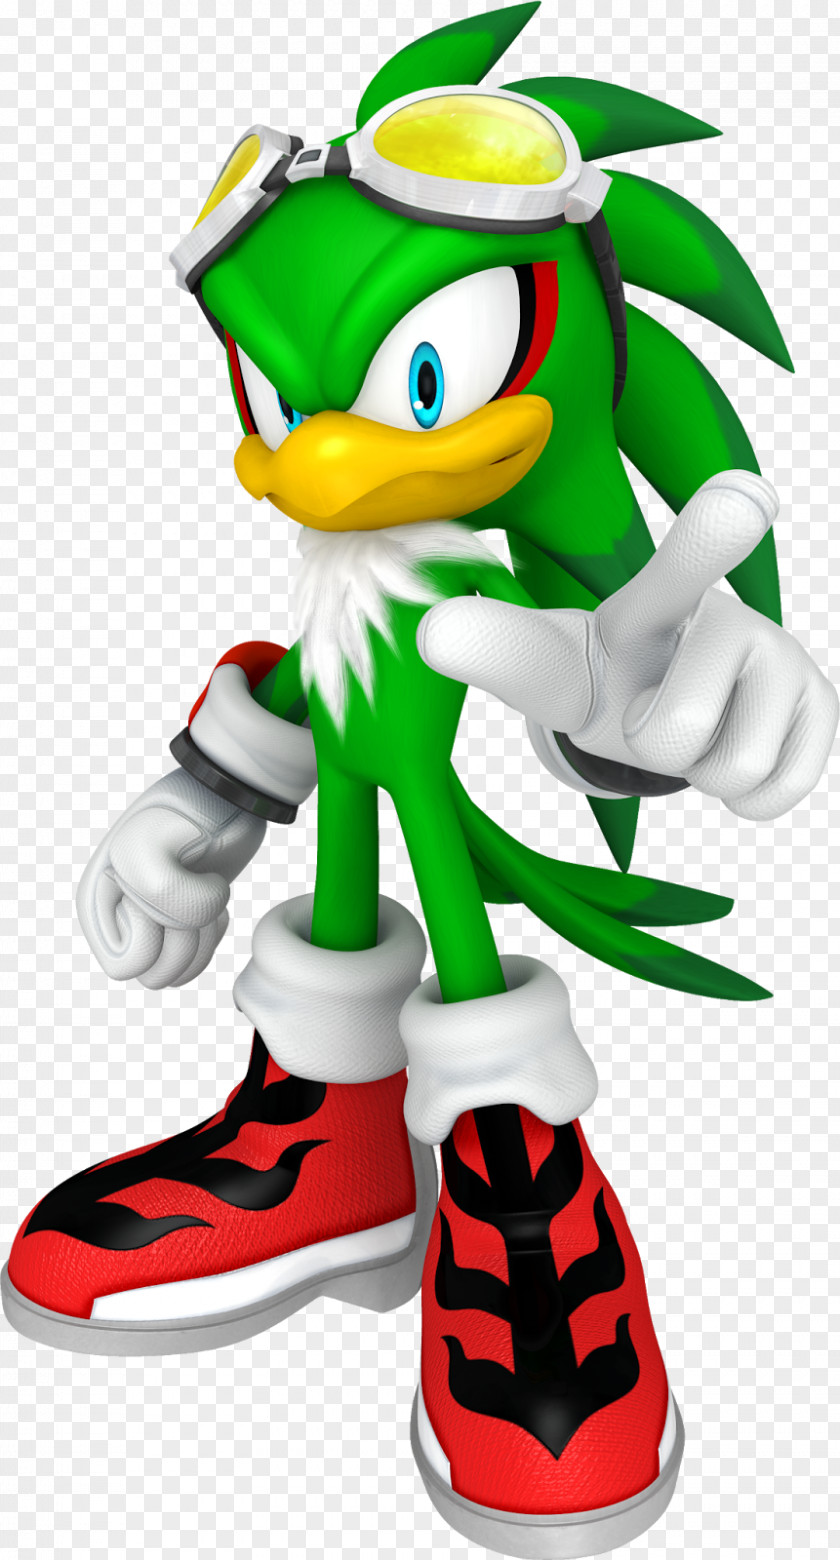 Jet Sonic Free Riders Riders: Zero Gravity The Hedgehog Knuckles Echidna PNG